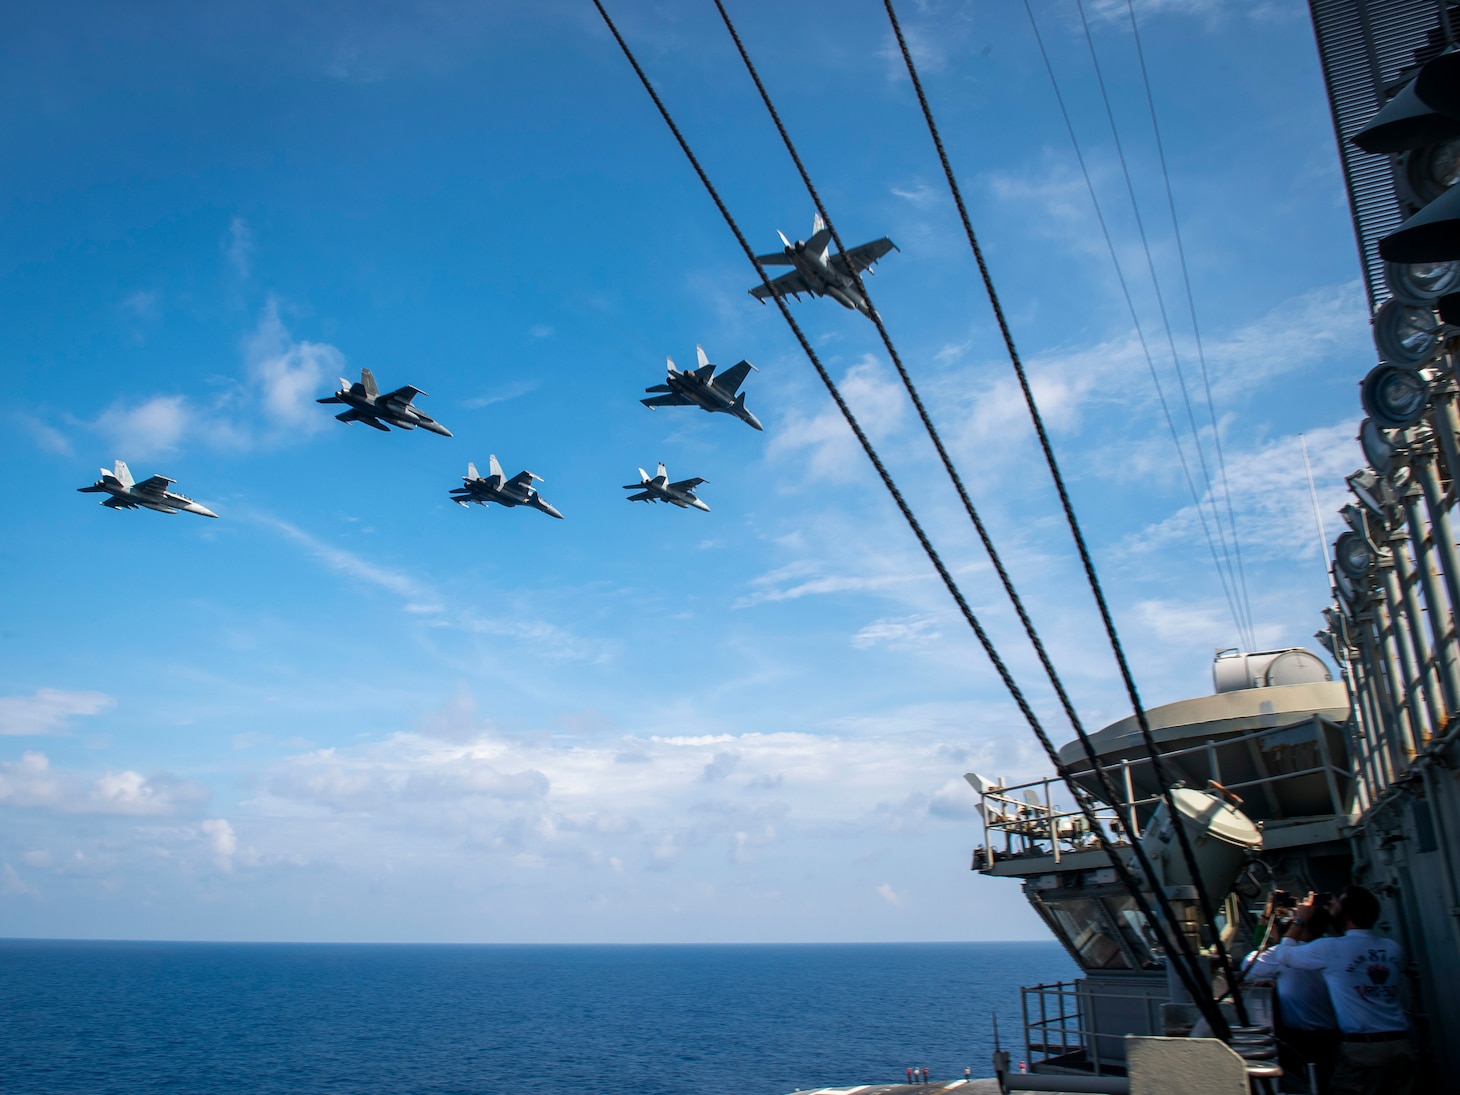 Aircraft from Carrier Air Wing (CVW) 11 and the Royal Malaysian Air Force (RMAF) fly above the aircraft carrier USS Theodore Roosevelt (CVN 71).